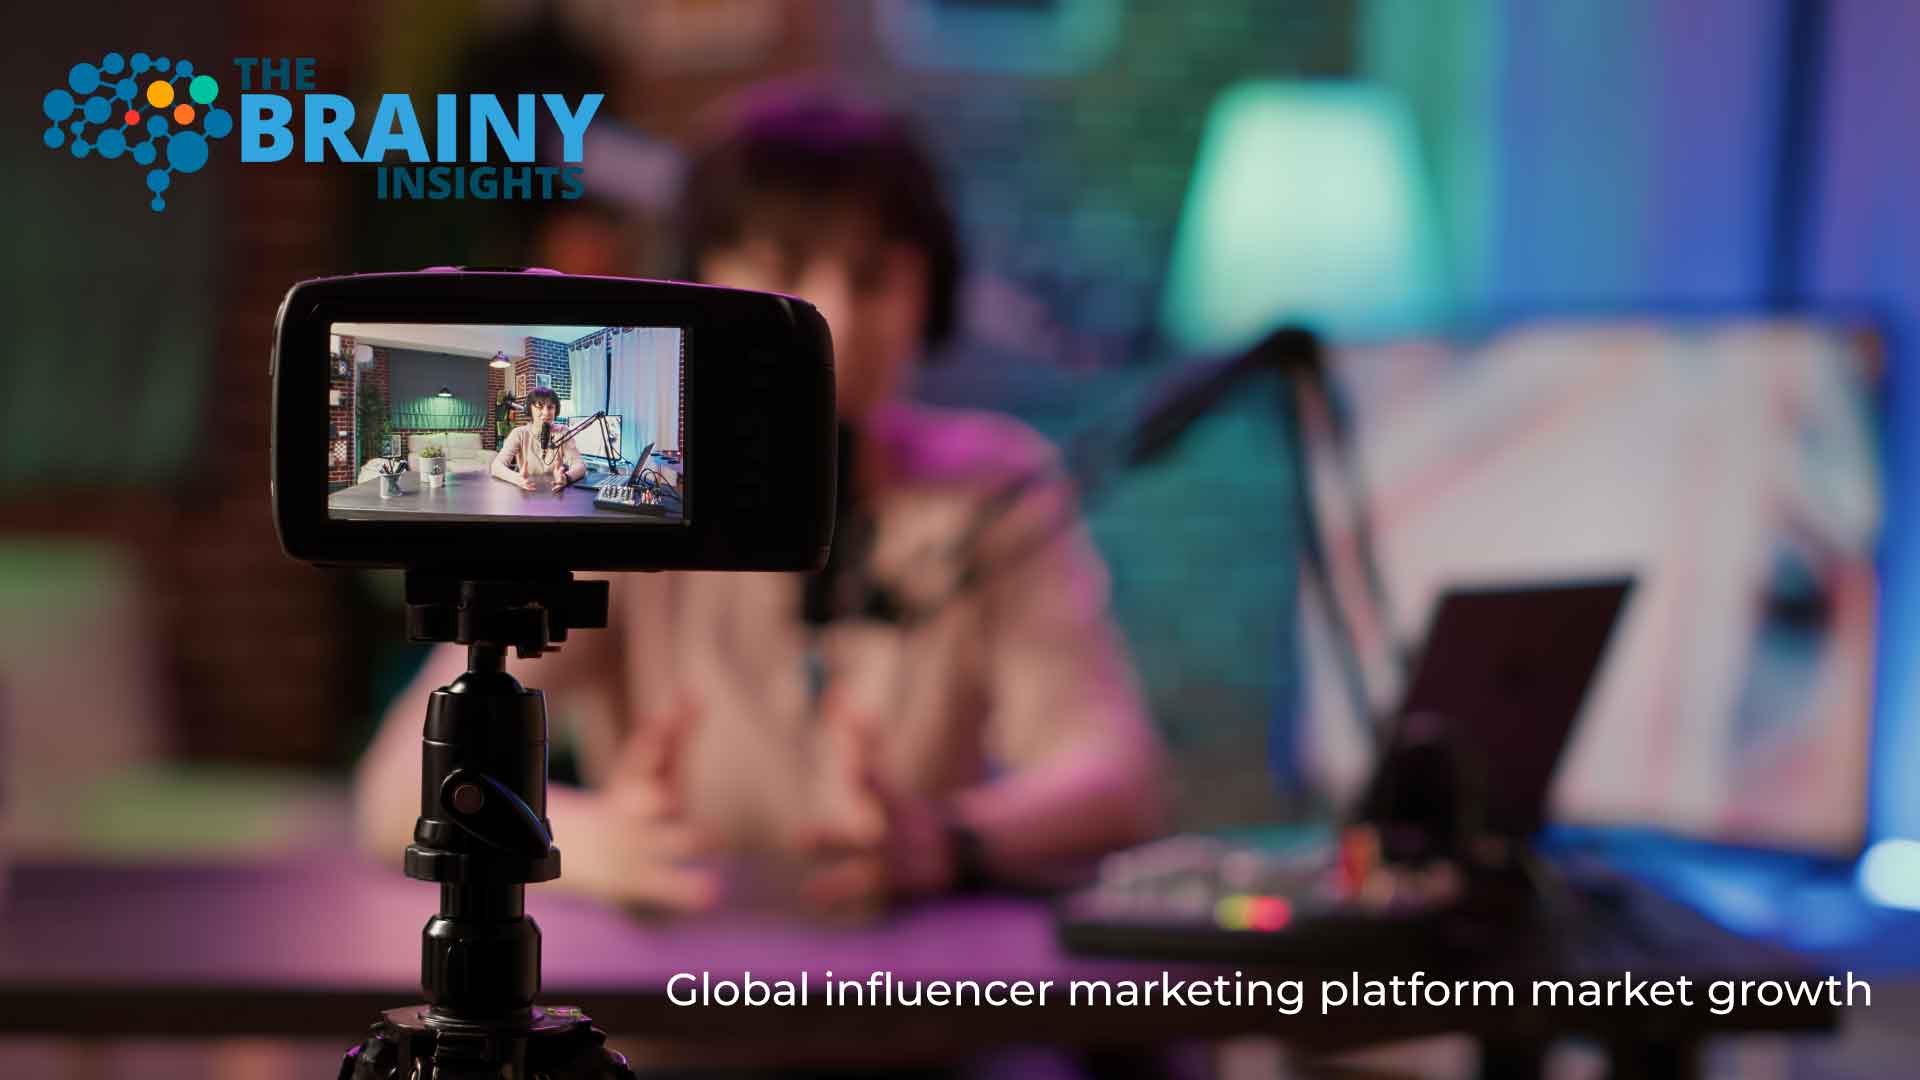 Influencer Marketing Platform Market to Grow at CAGR of 31.50% through 2030 - Industry Expanding Horizons as Client Engagement in OTT Platforms Bolster: The Brainy Insights